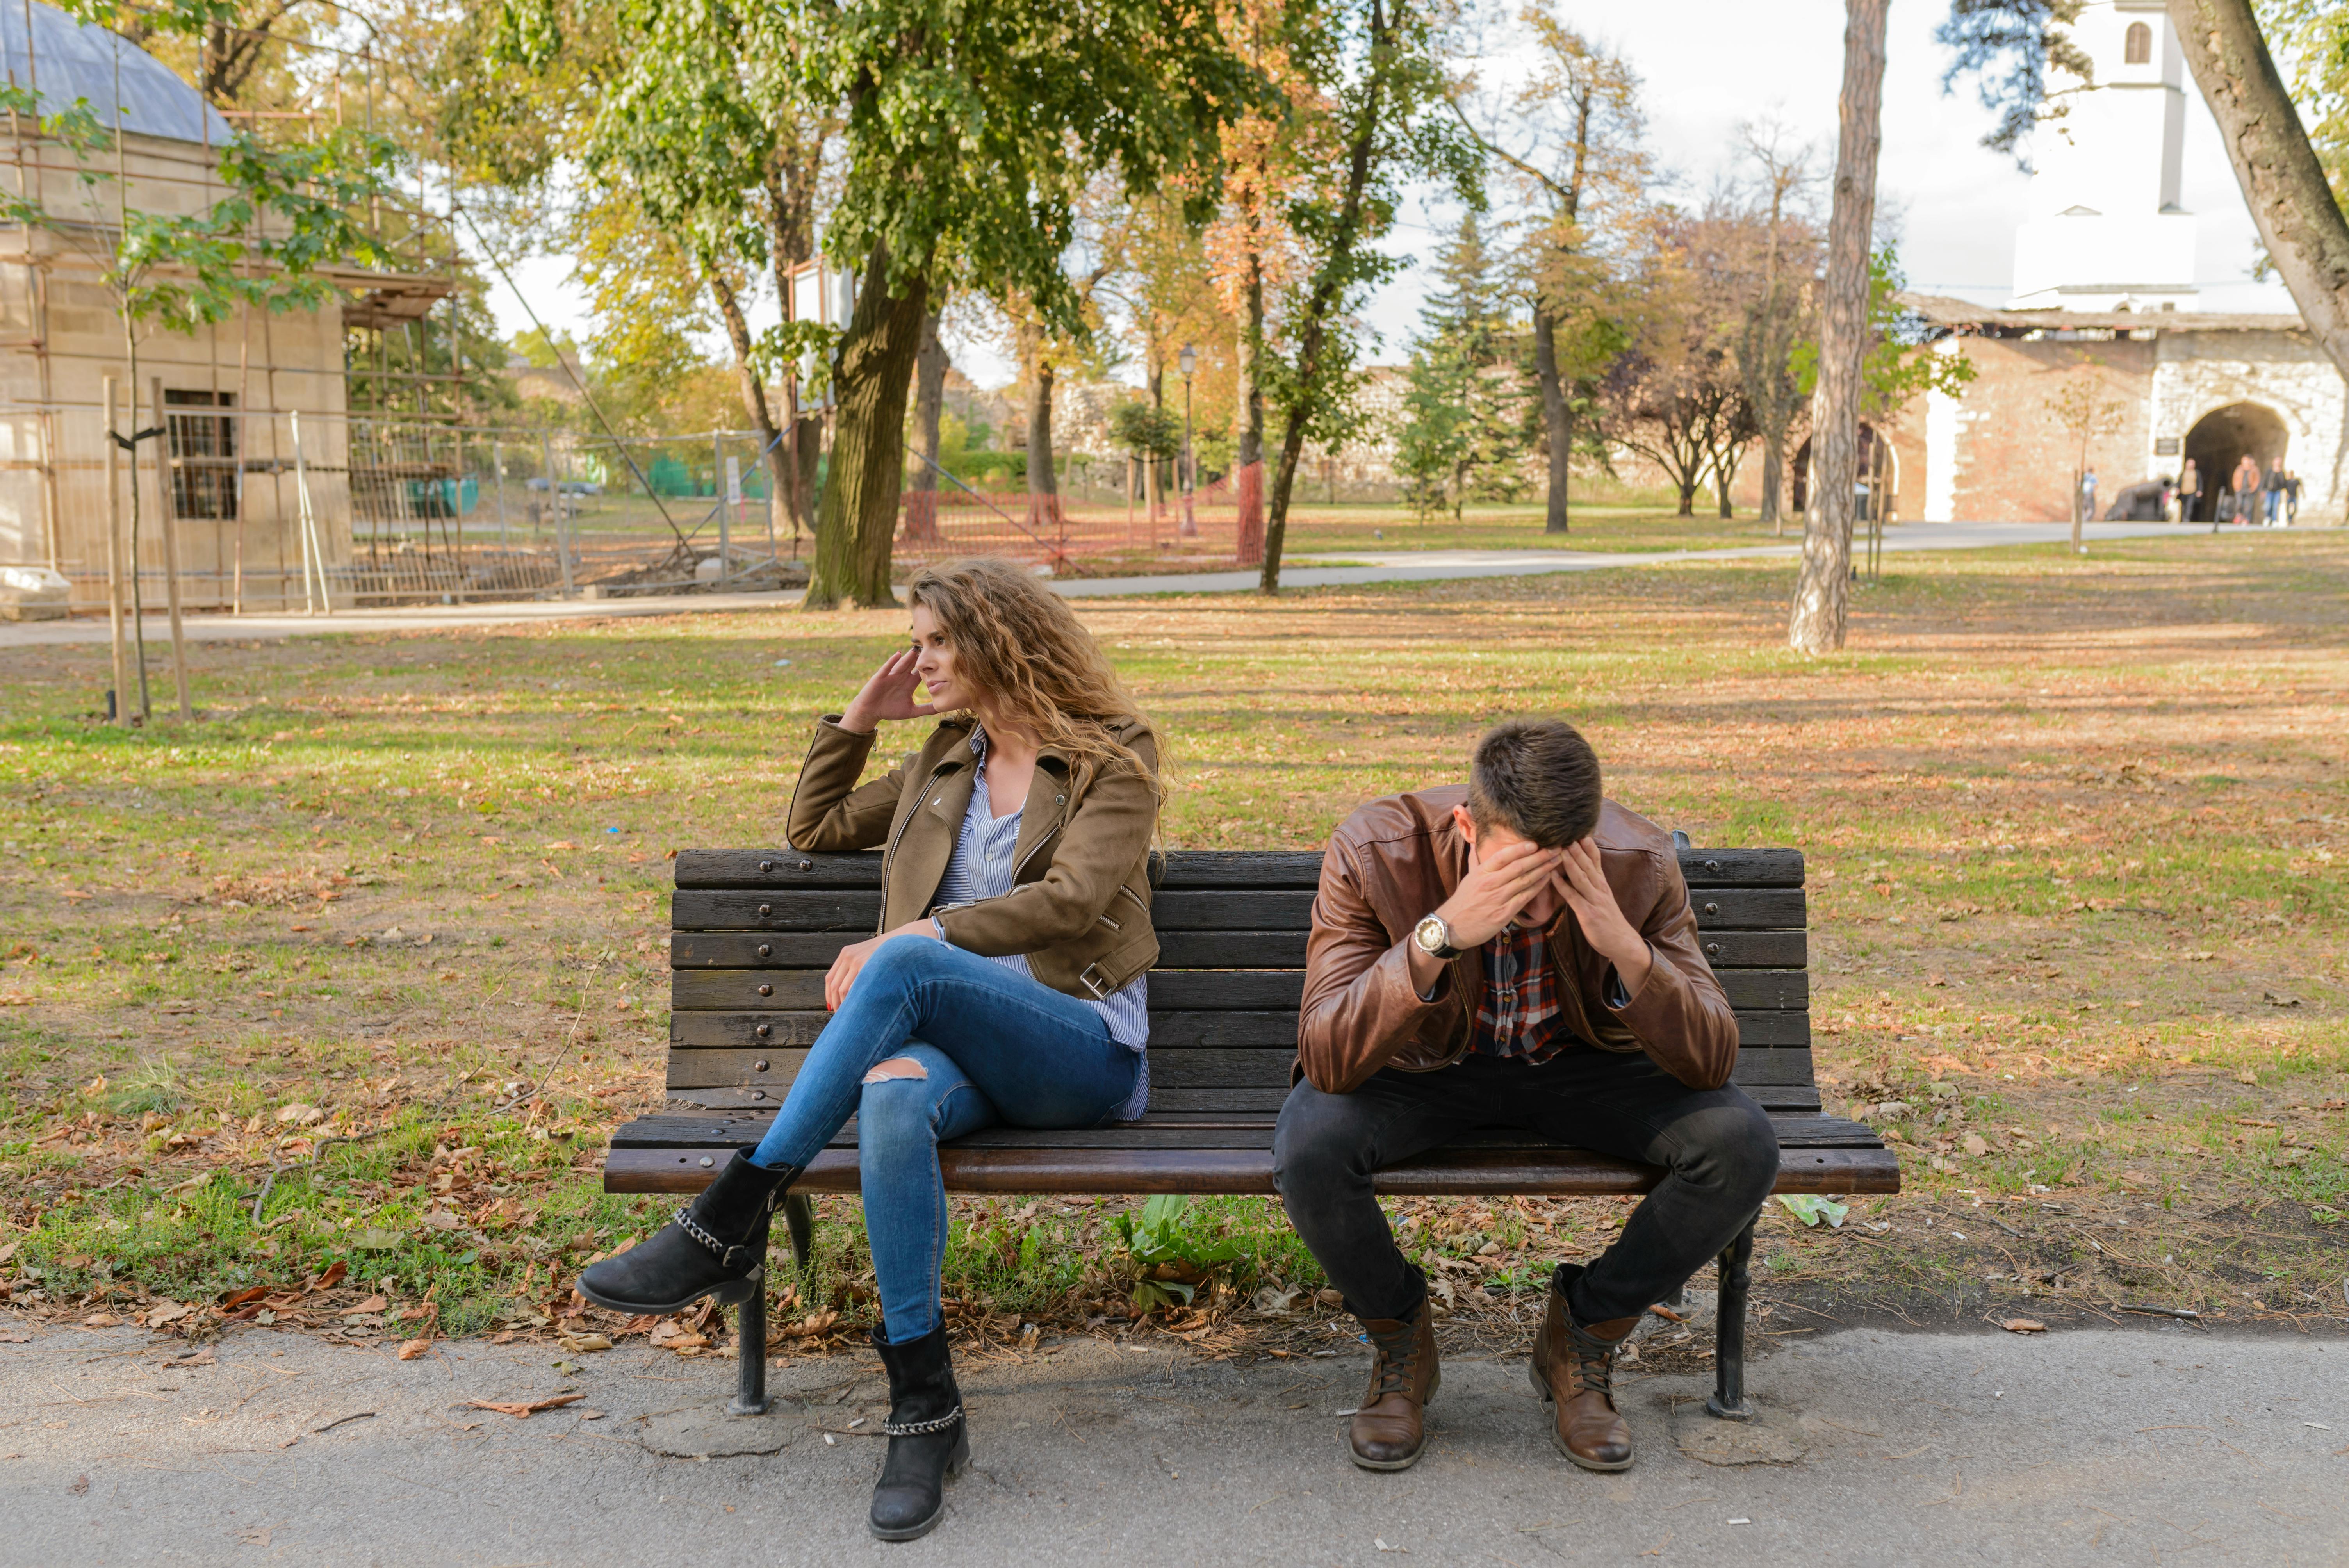 Couple sitting on a bench | Photo: Pexels